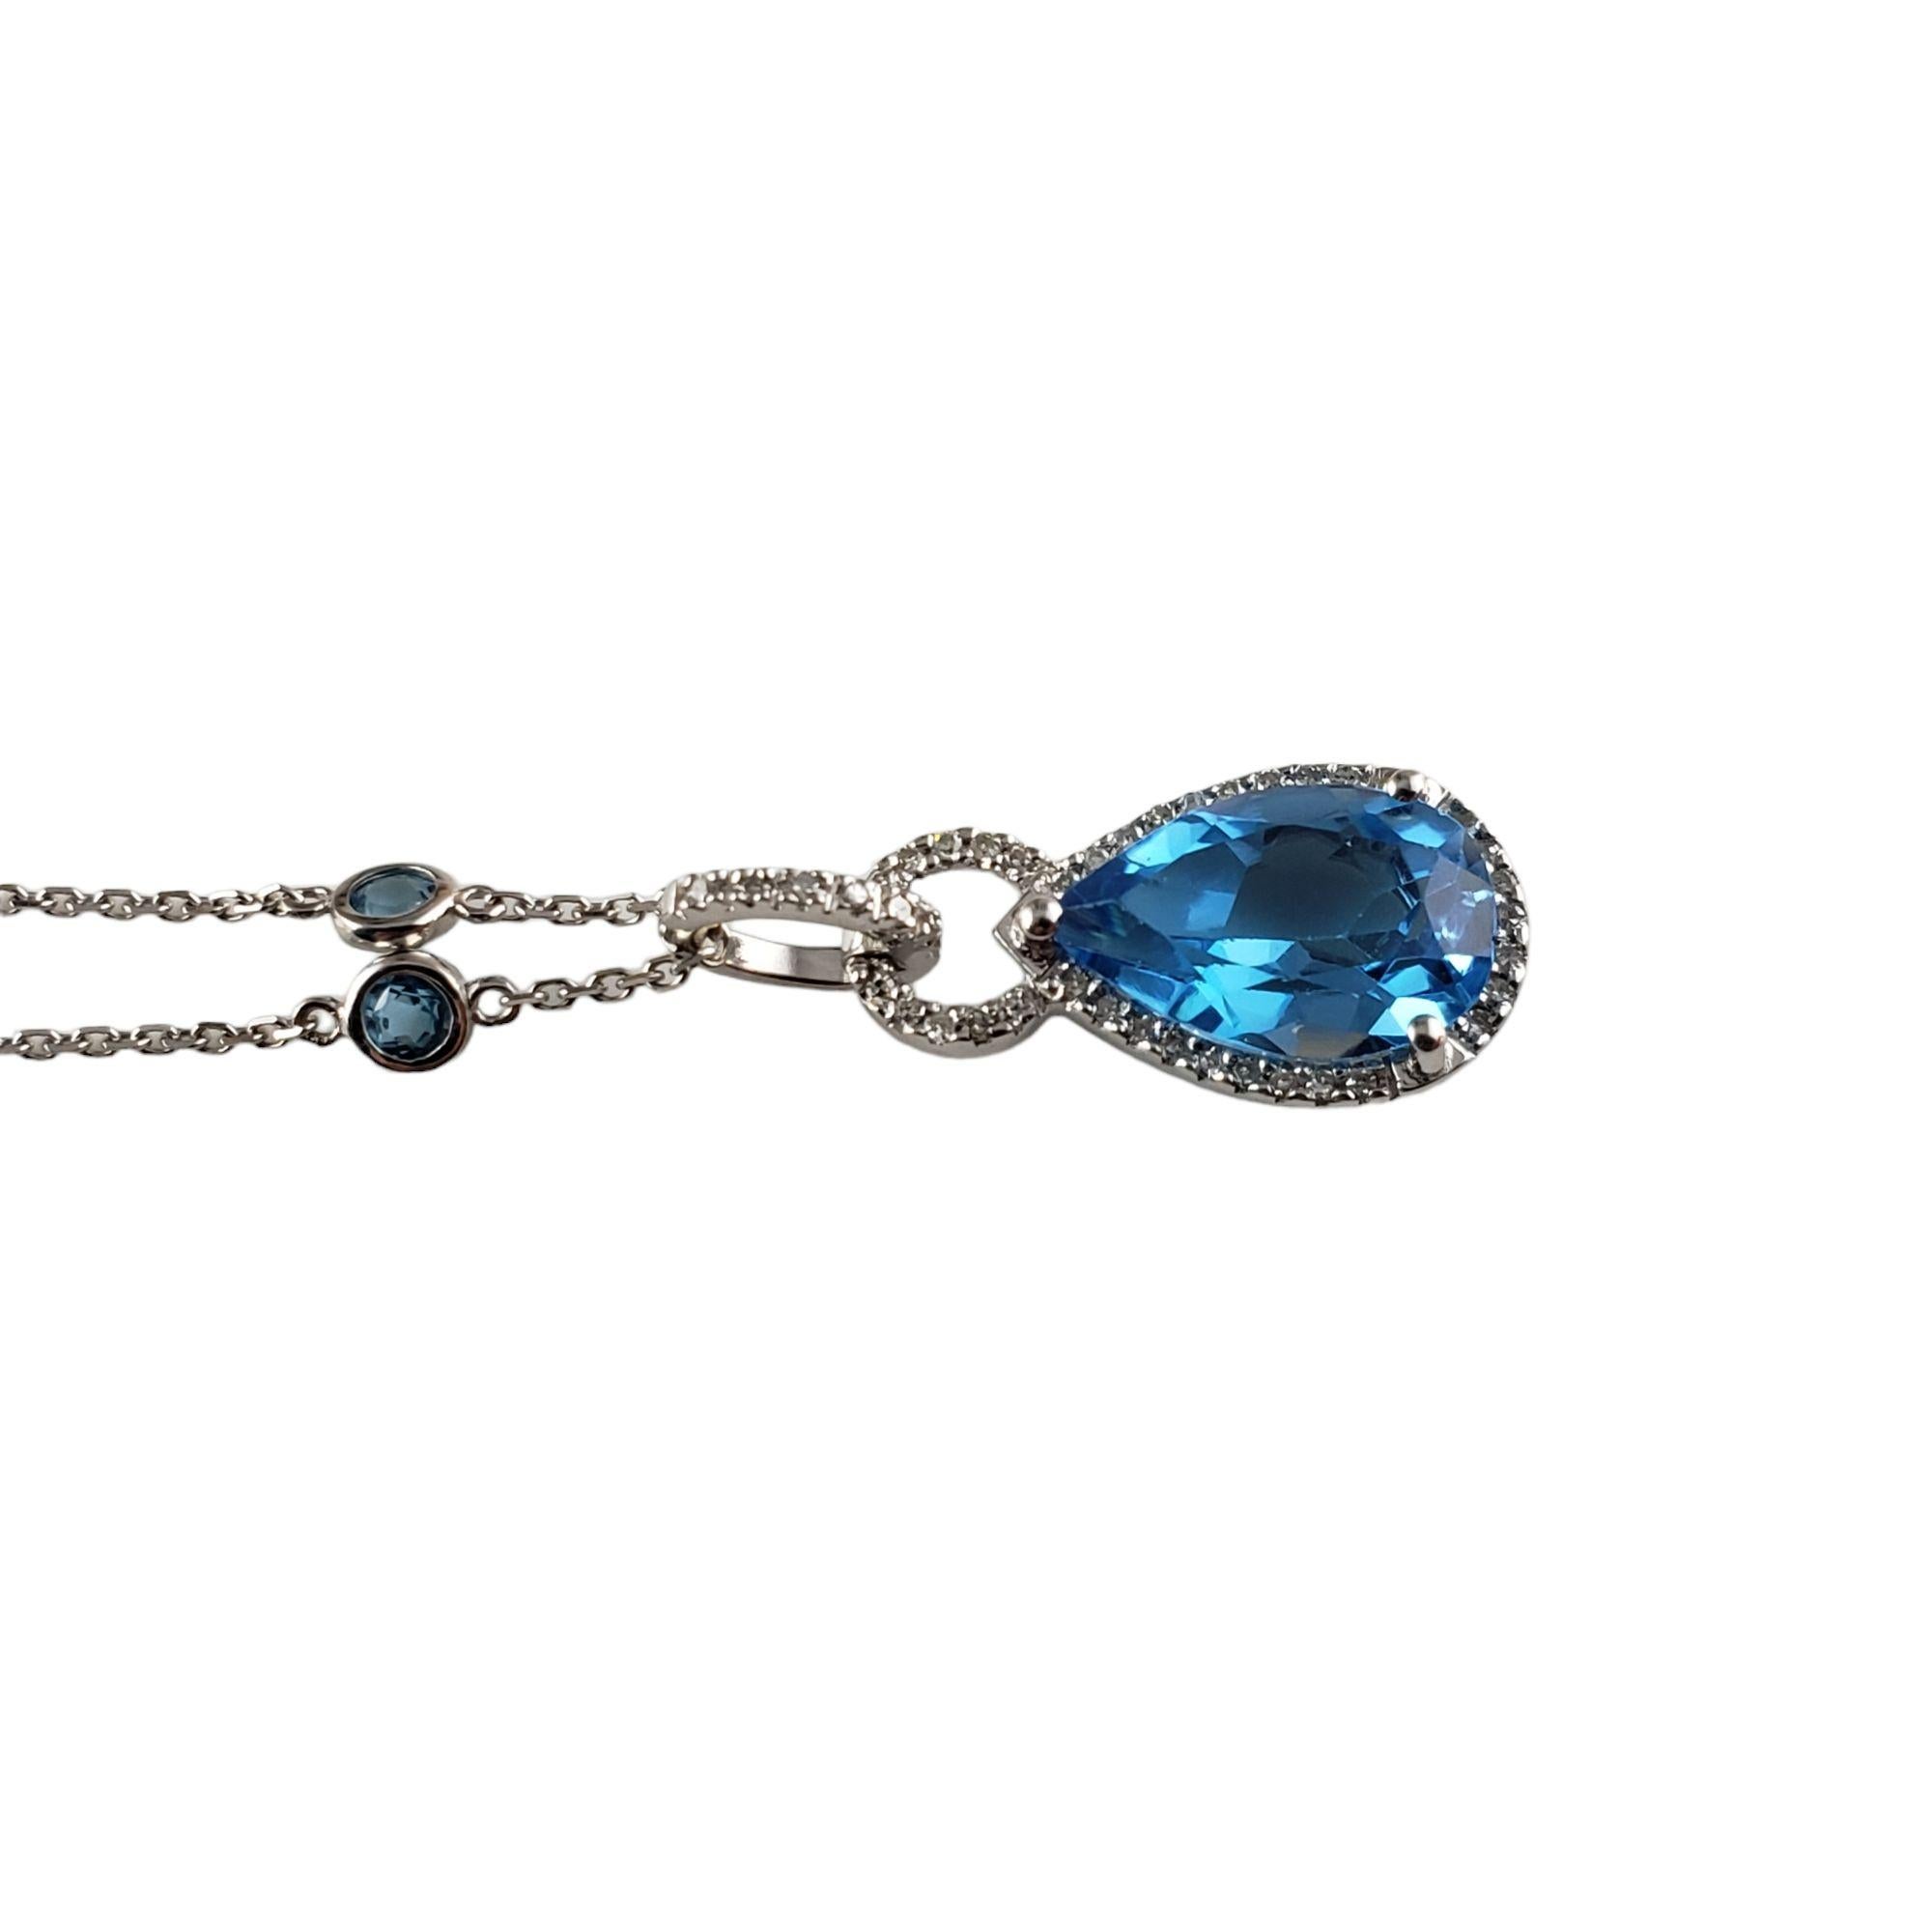 14 Karat White Gold Blue Topaz Diamond Pendant Necklace-

This lovely pendant features one pear shaped blue topaz (3.69 ct.) and 41 round single cut diamonds. The chain features 22 round bezel set blue topaz (total weight: 1.54 ct.).

Total diamond